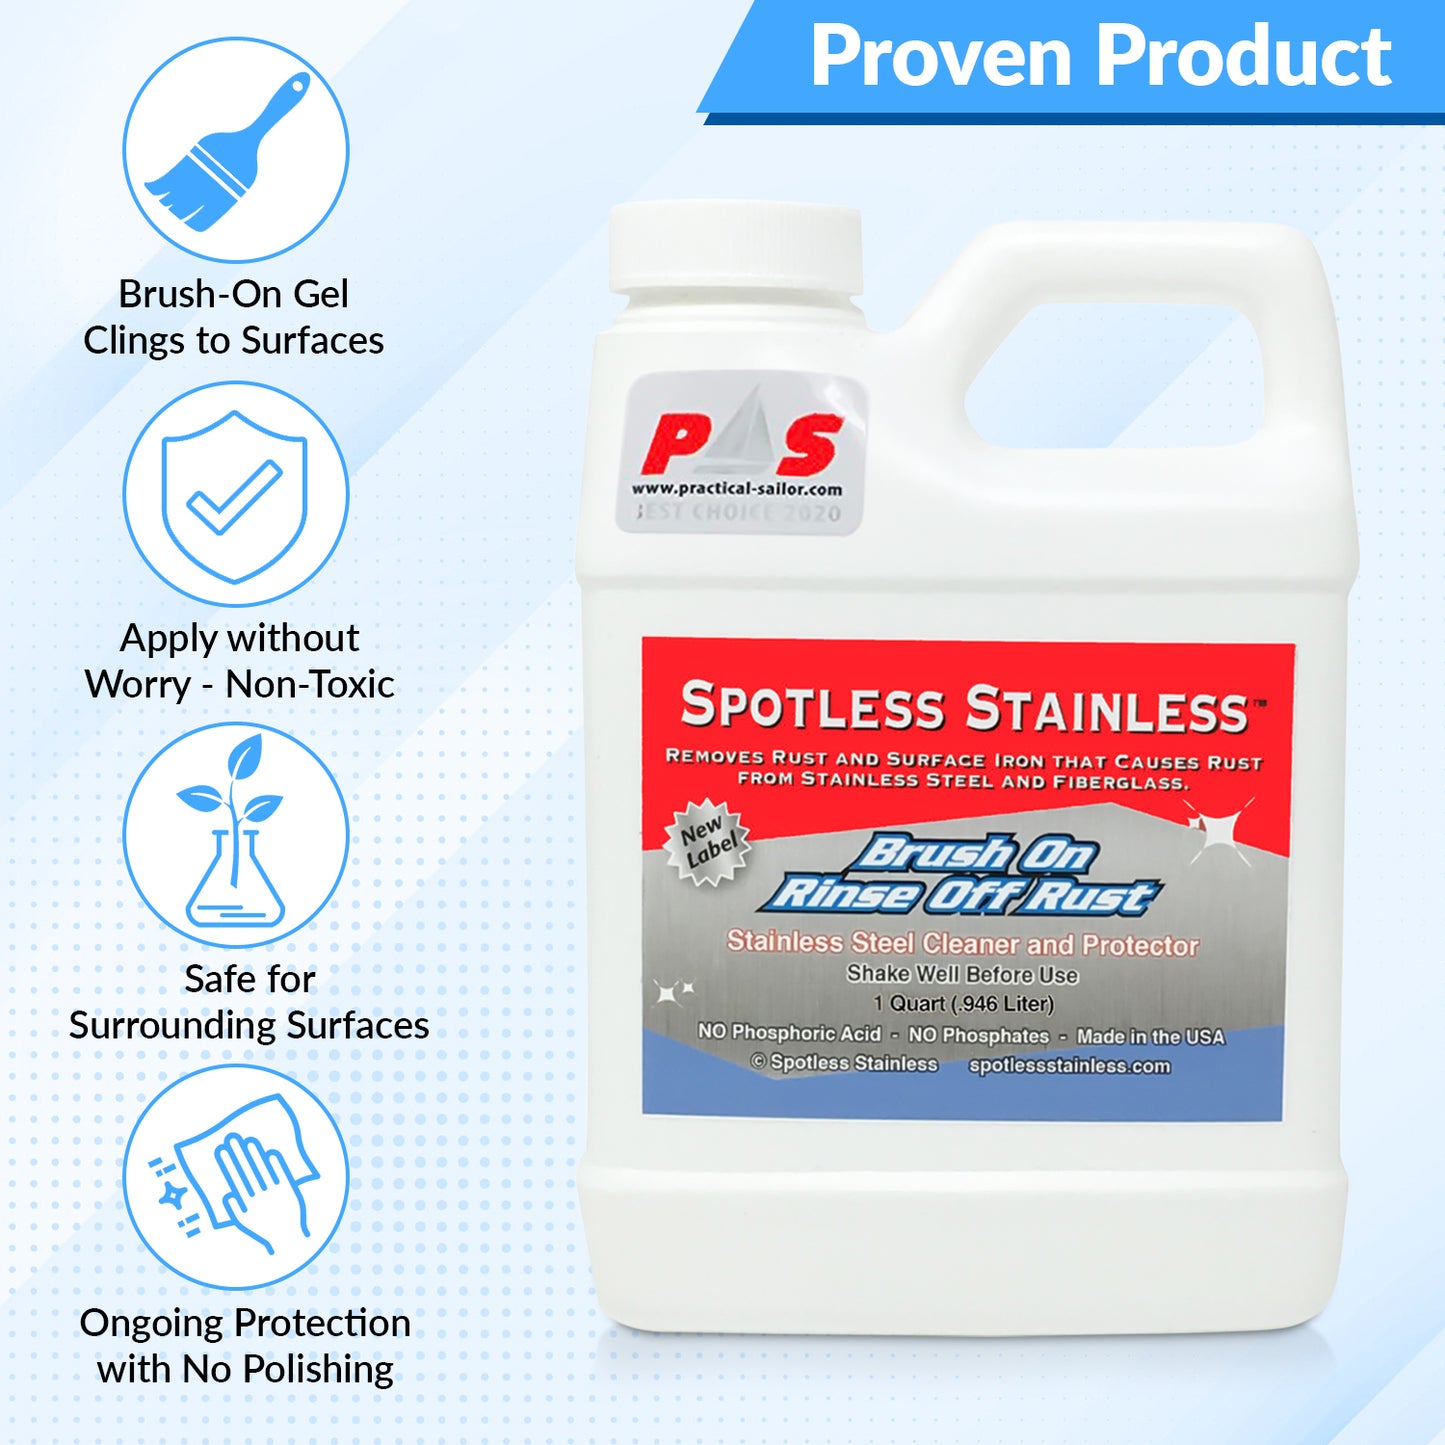 Spotless Stainless Rust Remover and Protectant - 32 Oz (Quart)